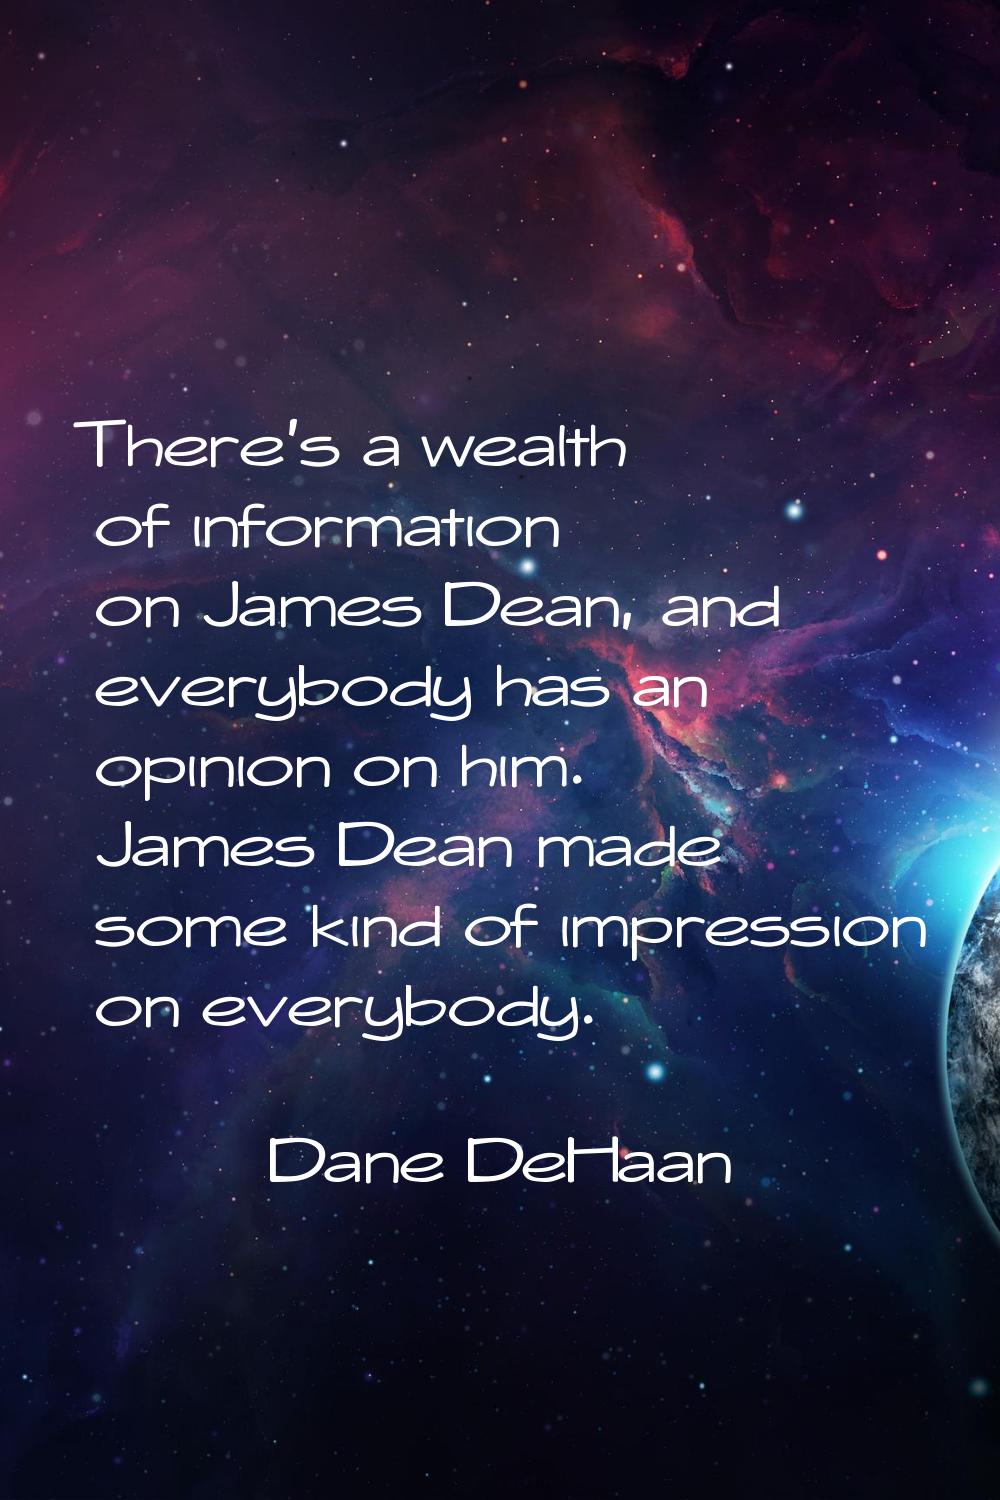 There's a wealth of information on James Dean, and everybody has an opinion on him. James Dean made